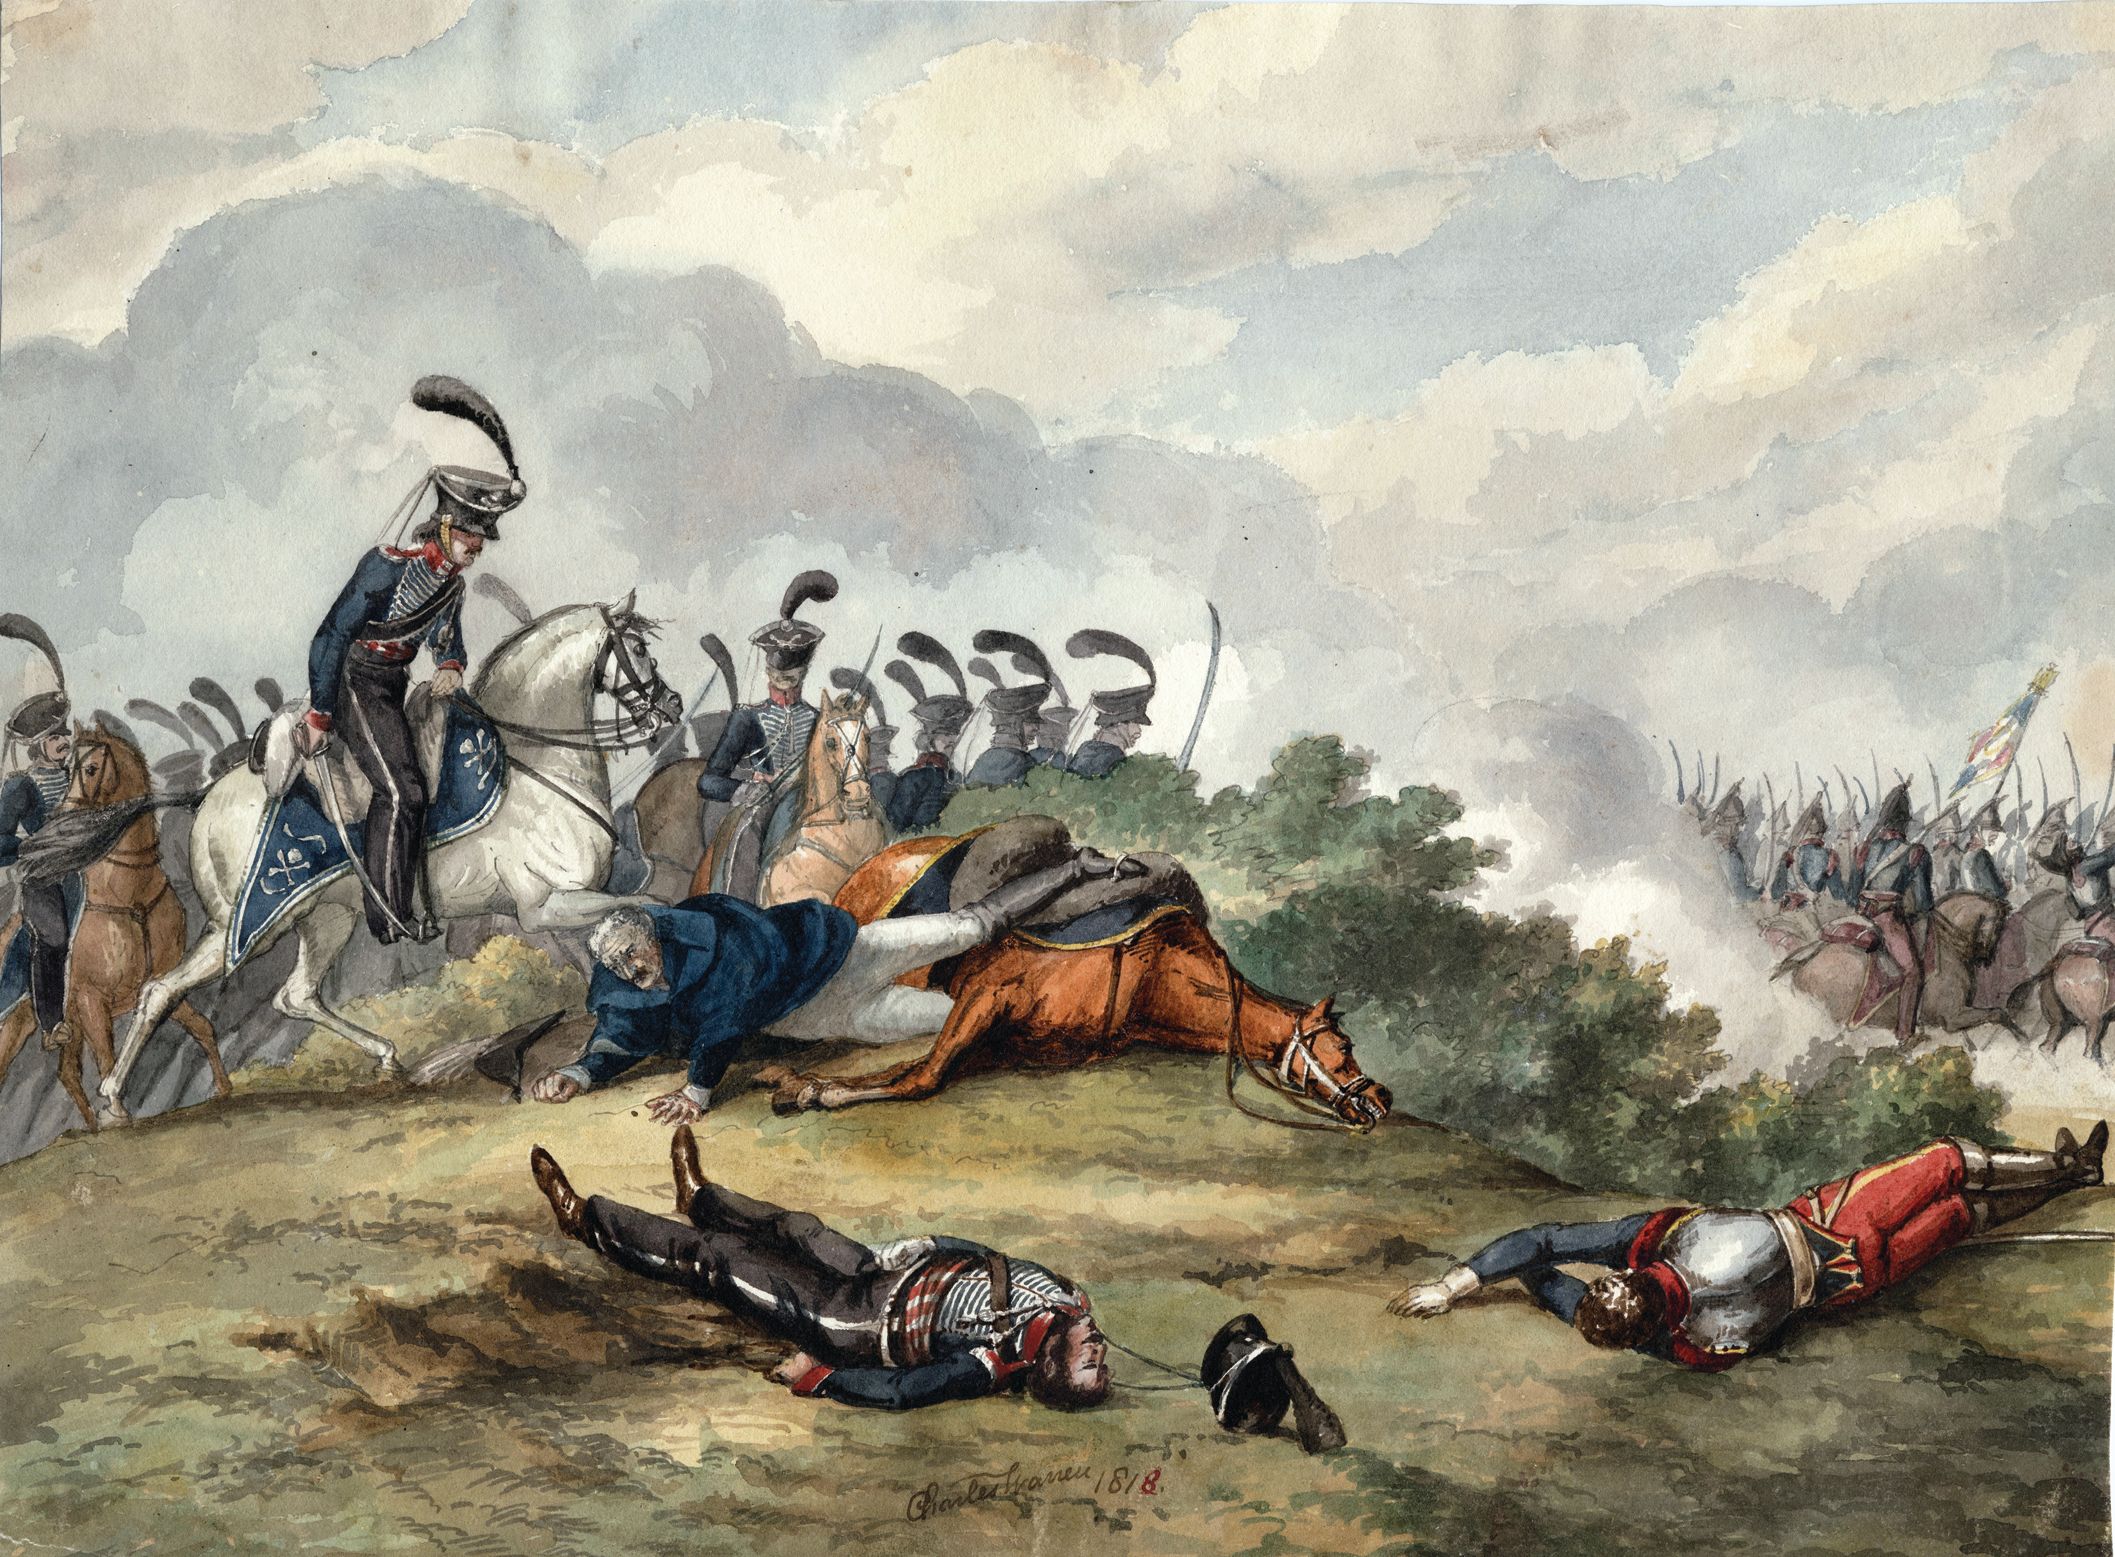 Seventy-two-year-old Field Marshal Blucher is shown pinned under his horse after leading a counterattack by his cavalry. Quick thinking by one of Blucher’s aides, who covered him with a cloak as French cavalry streamed past, helped the field marshal avoid capture while he was pinned for two hours. 